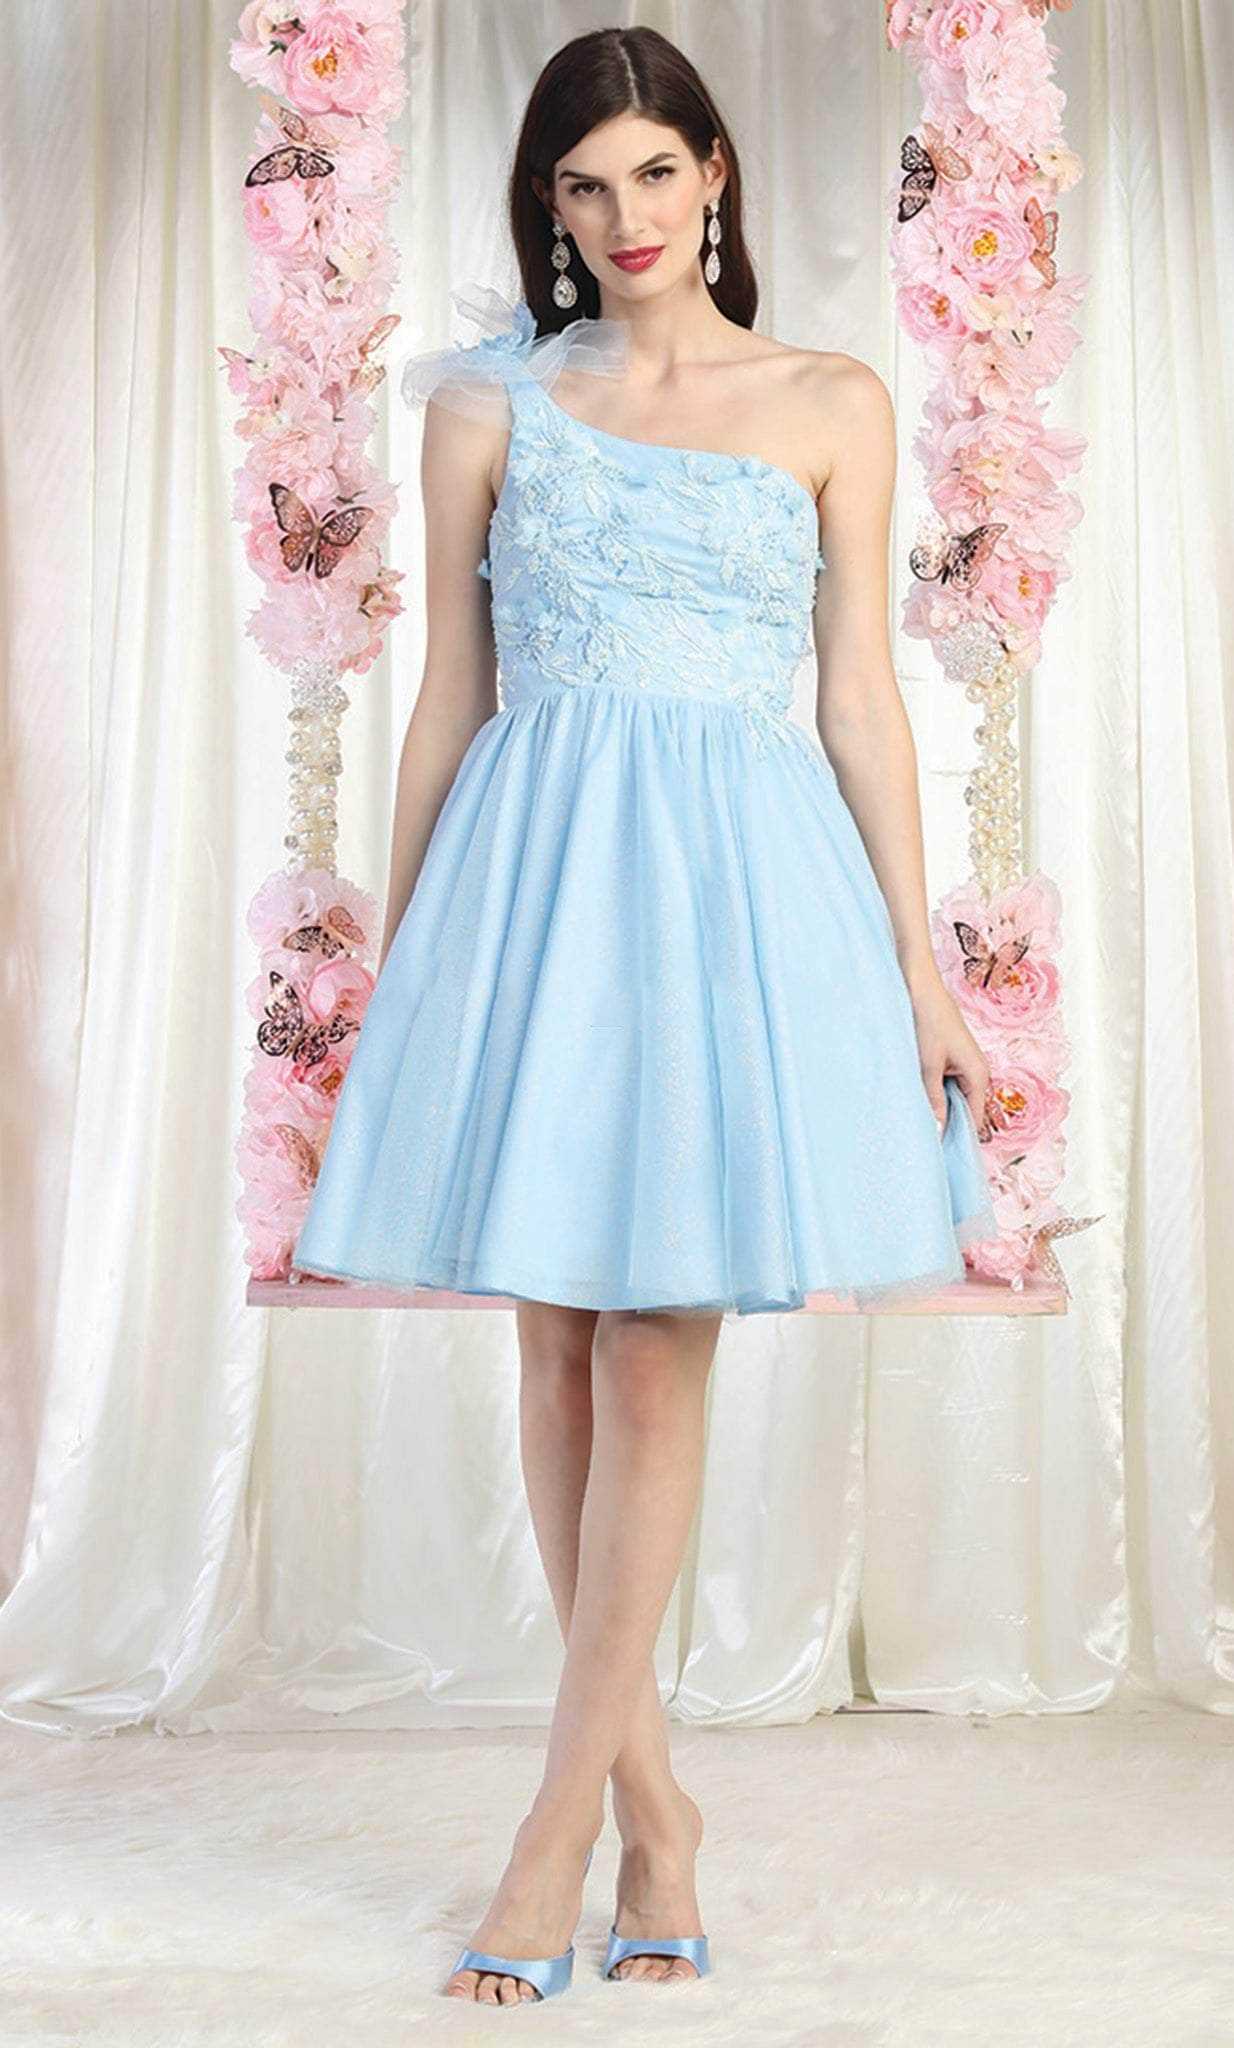 May Queen, May Queen MQ1952 - One Shoulder A-Line Cocktail Dress